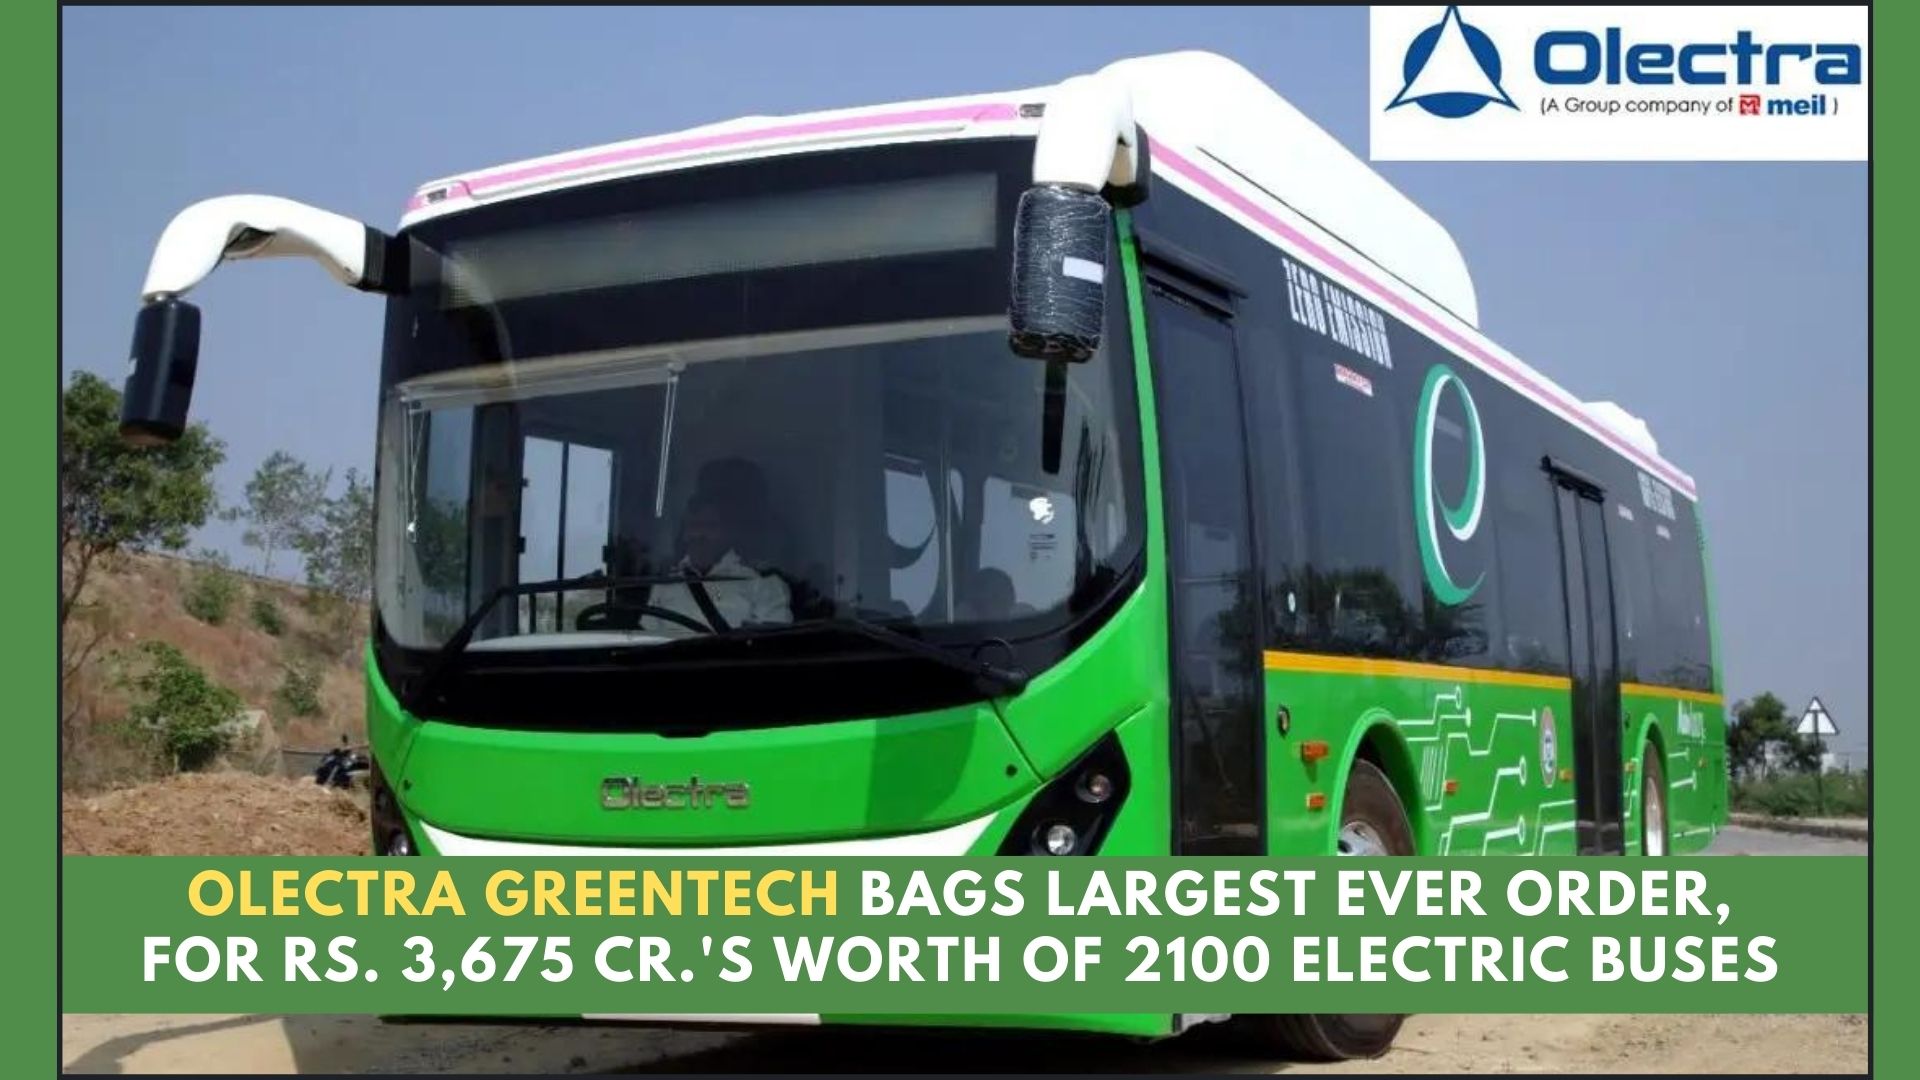 Olectra Greentech bags largest ever order, for Rs. 3,675 Cr.'s worth of 2100 electric buses